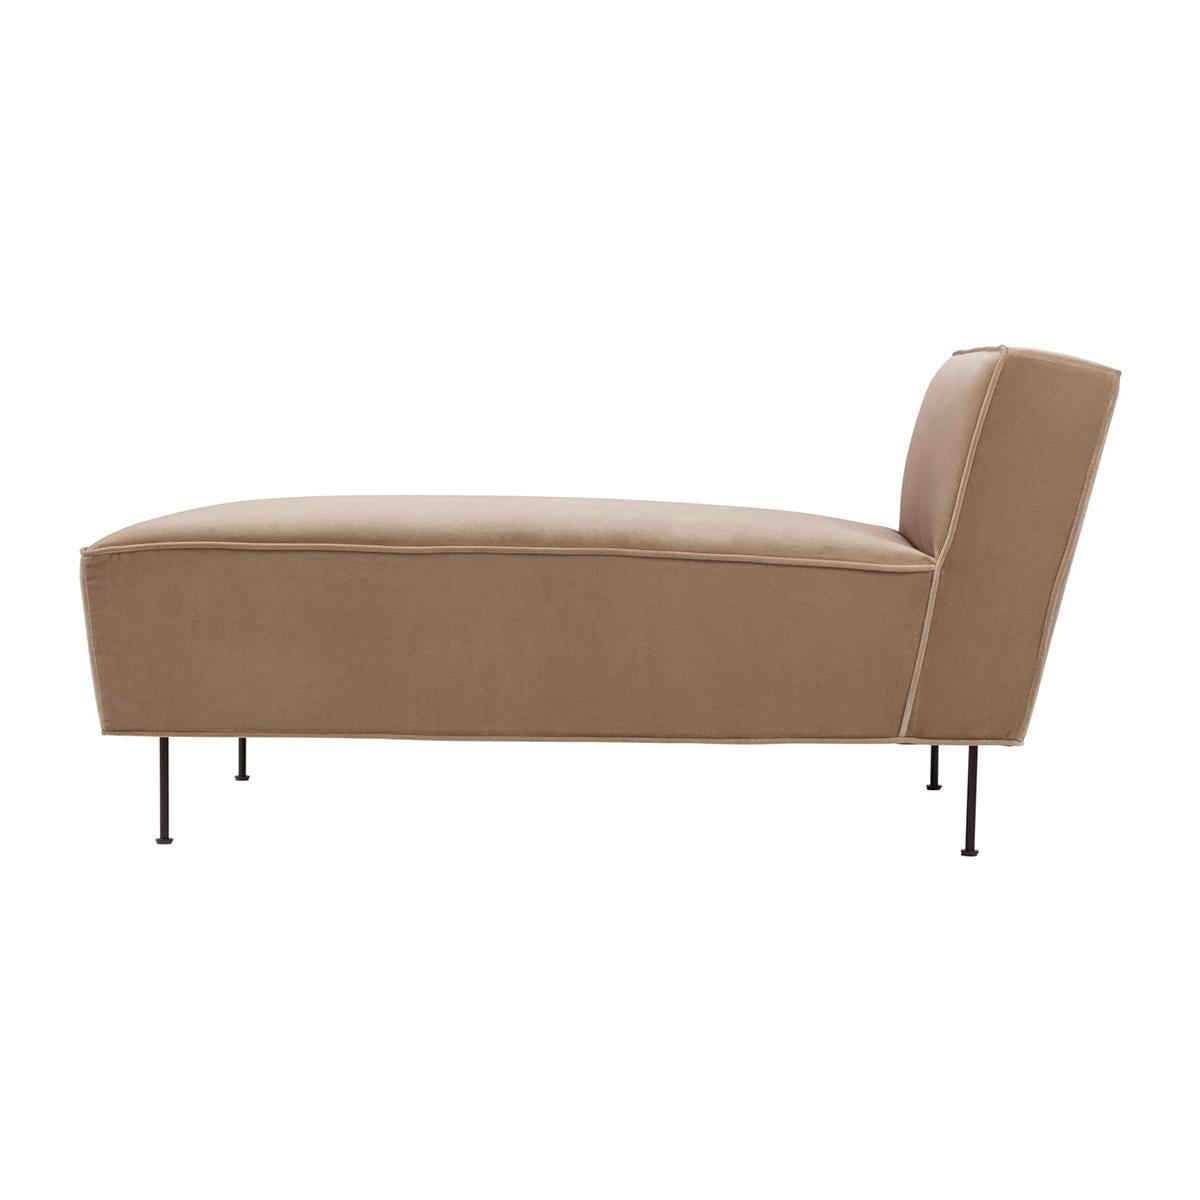 Creating an exclamation mark in the interior, the modern line chaise loungeis extended from the original modern line sofa, designed in 1949 by the legendary Greta M. Grossman. Taking the low back and seat as inspiration, the elongated chaise